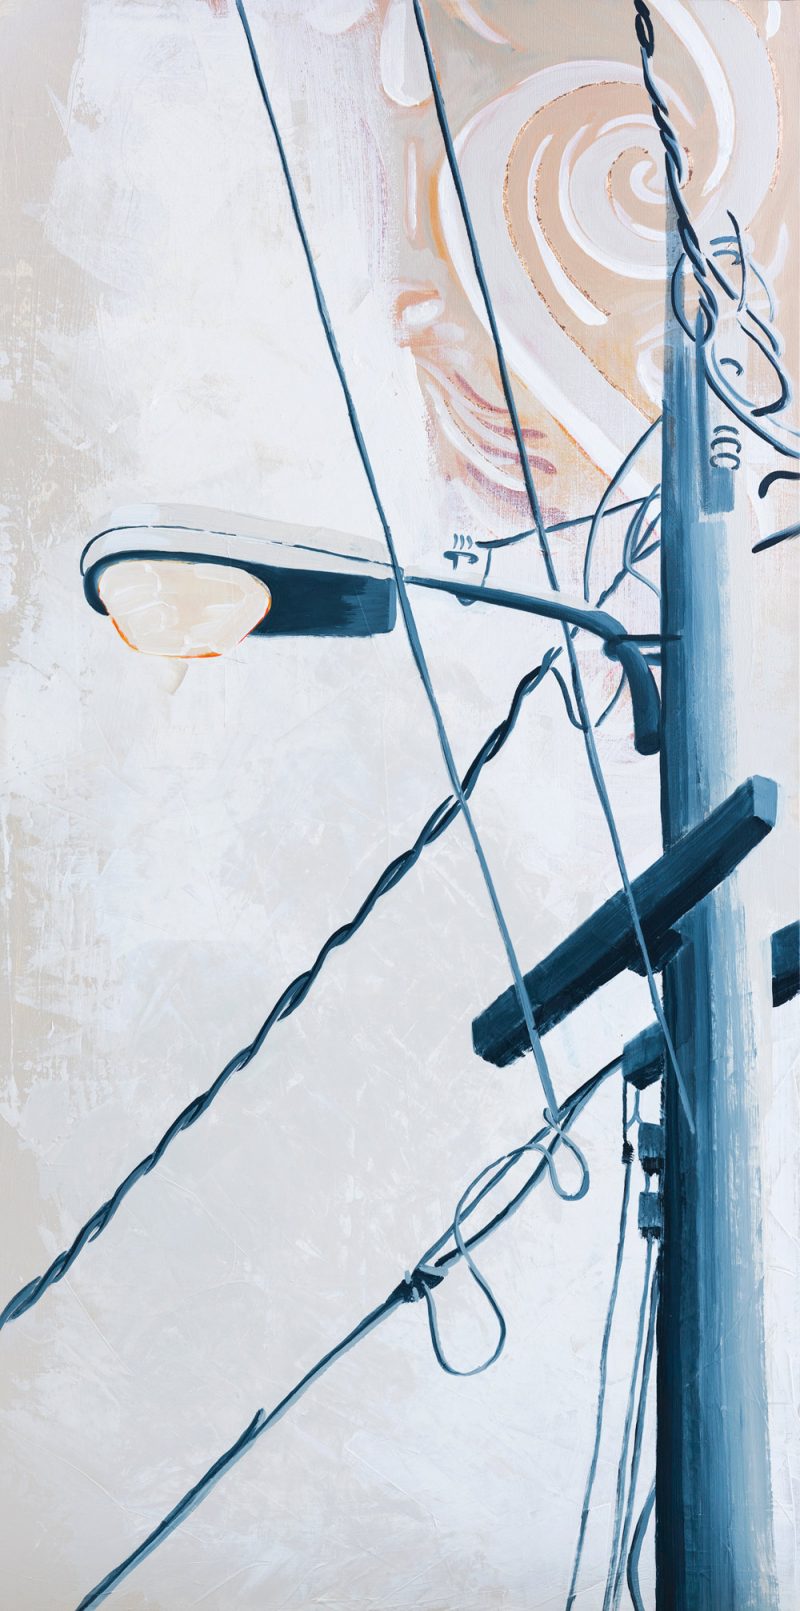 “Through the Alley and Left,” by Teale Hatheway is an urban street light painting in cream, blue and soft rust colors.